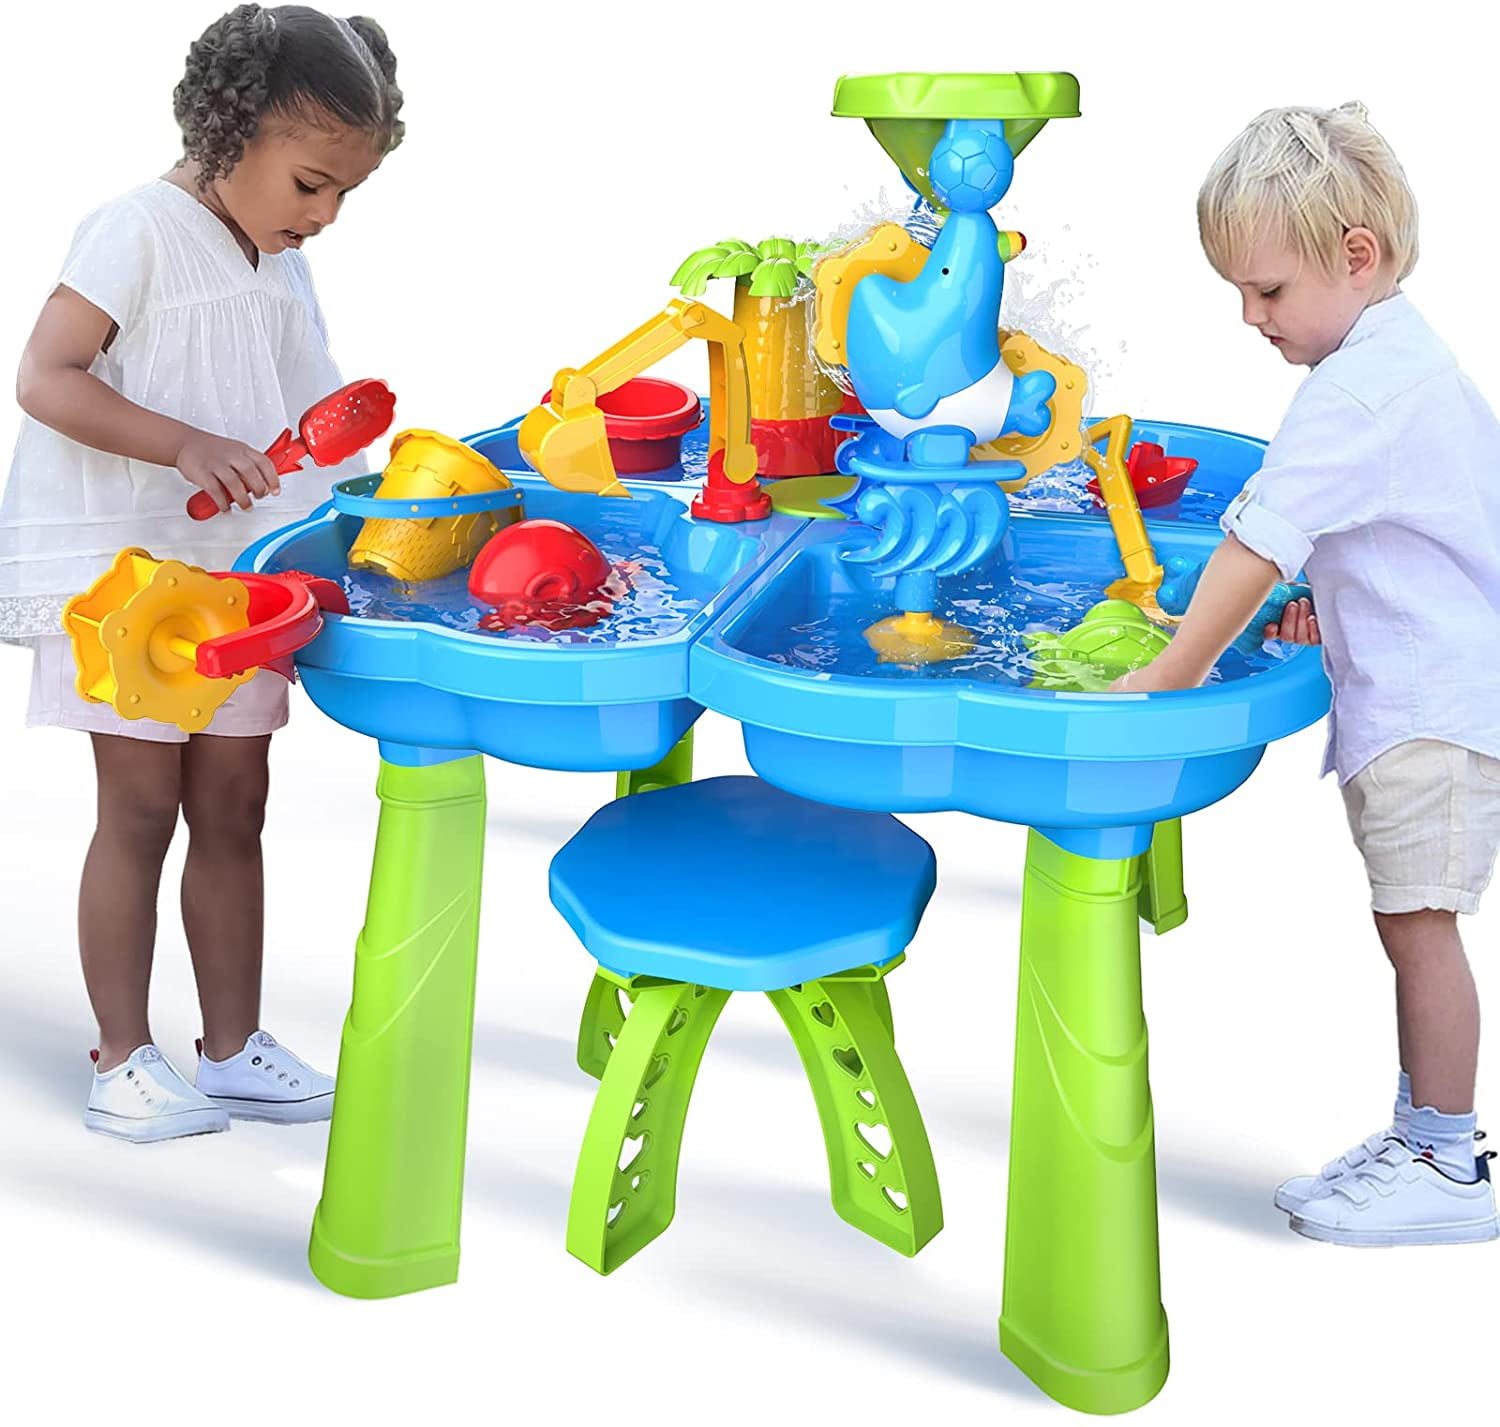 Dinosaur Planet Sand Water Table for Toddlers, 4 in 1 Sand Table